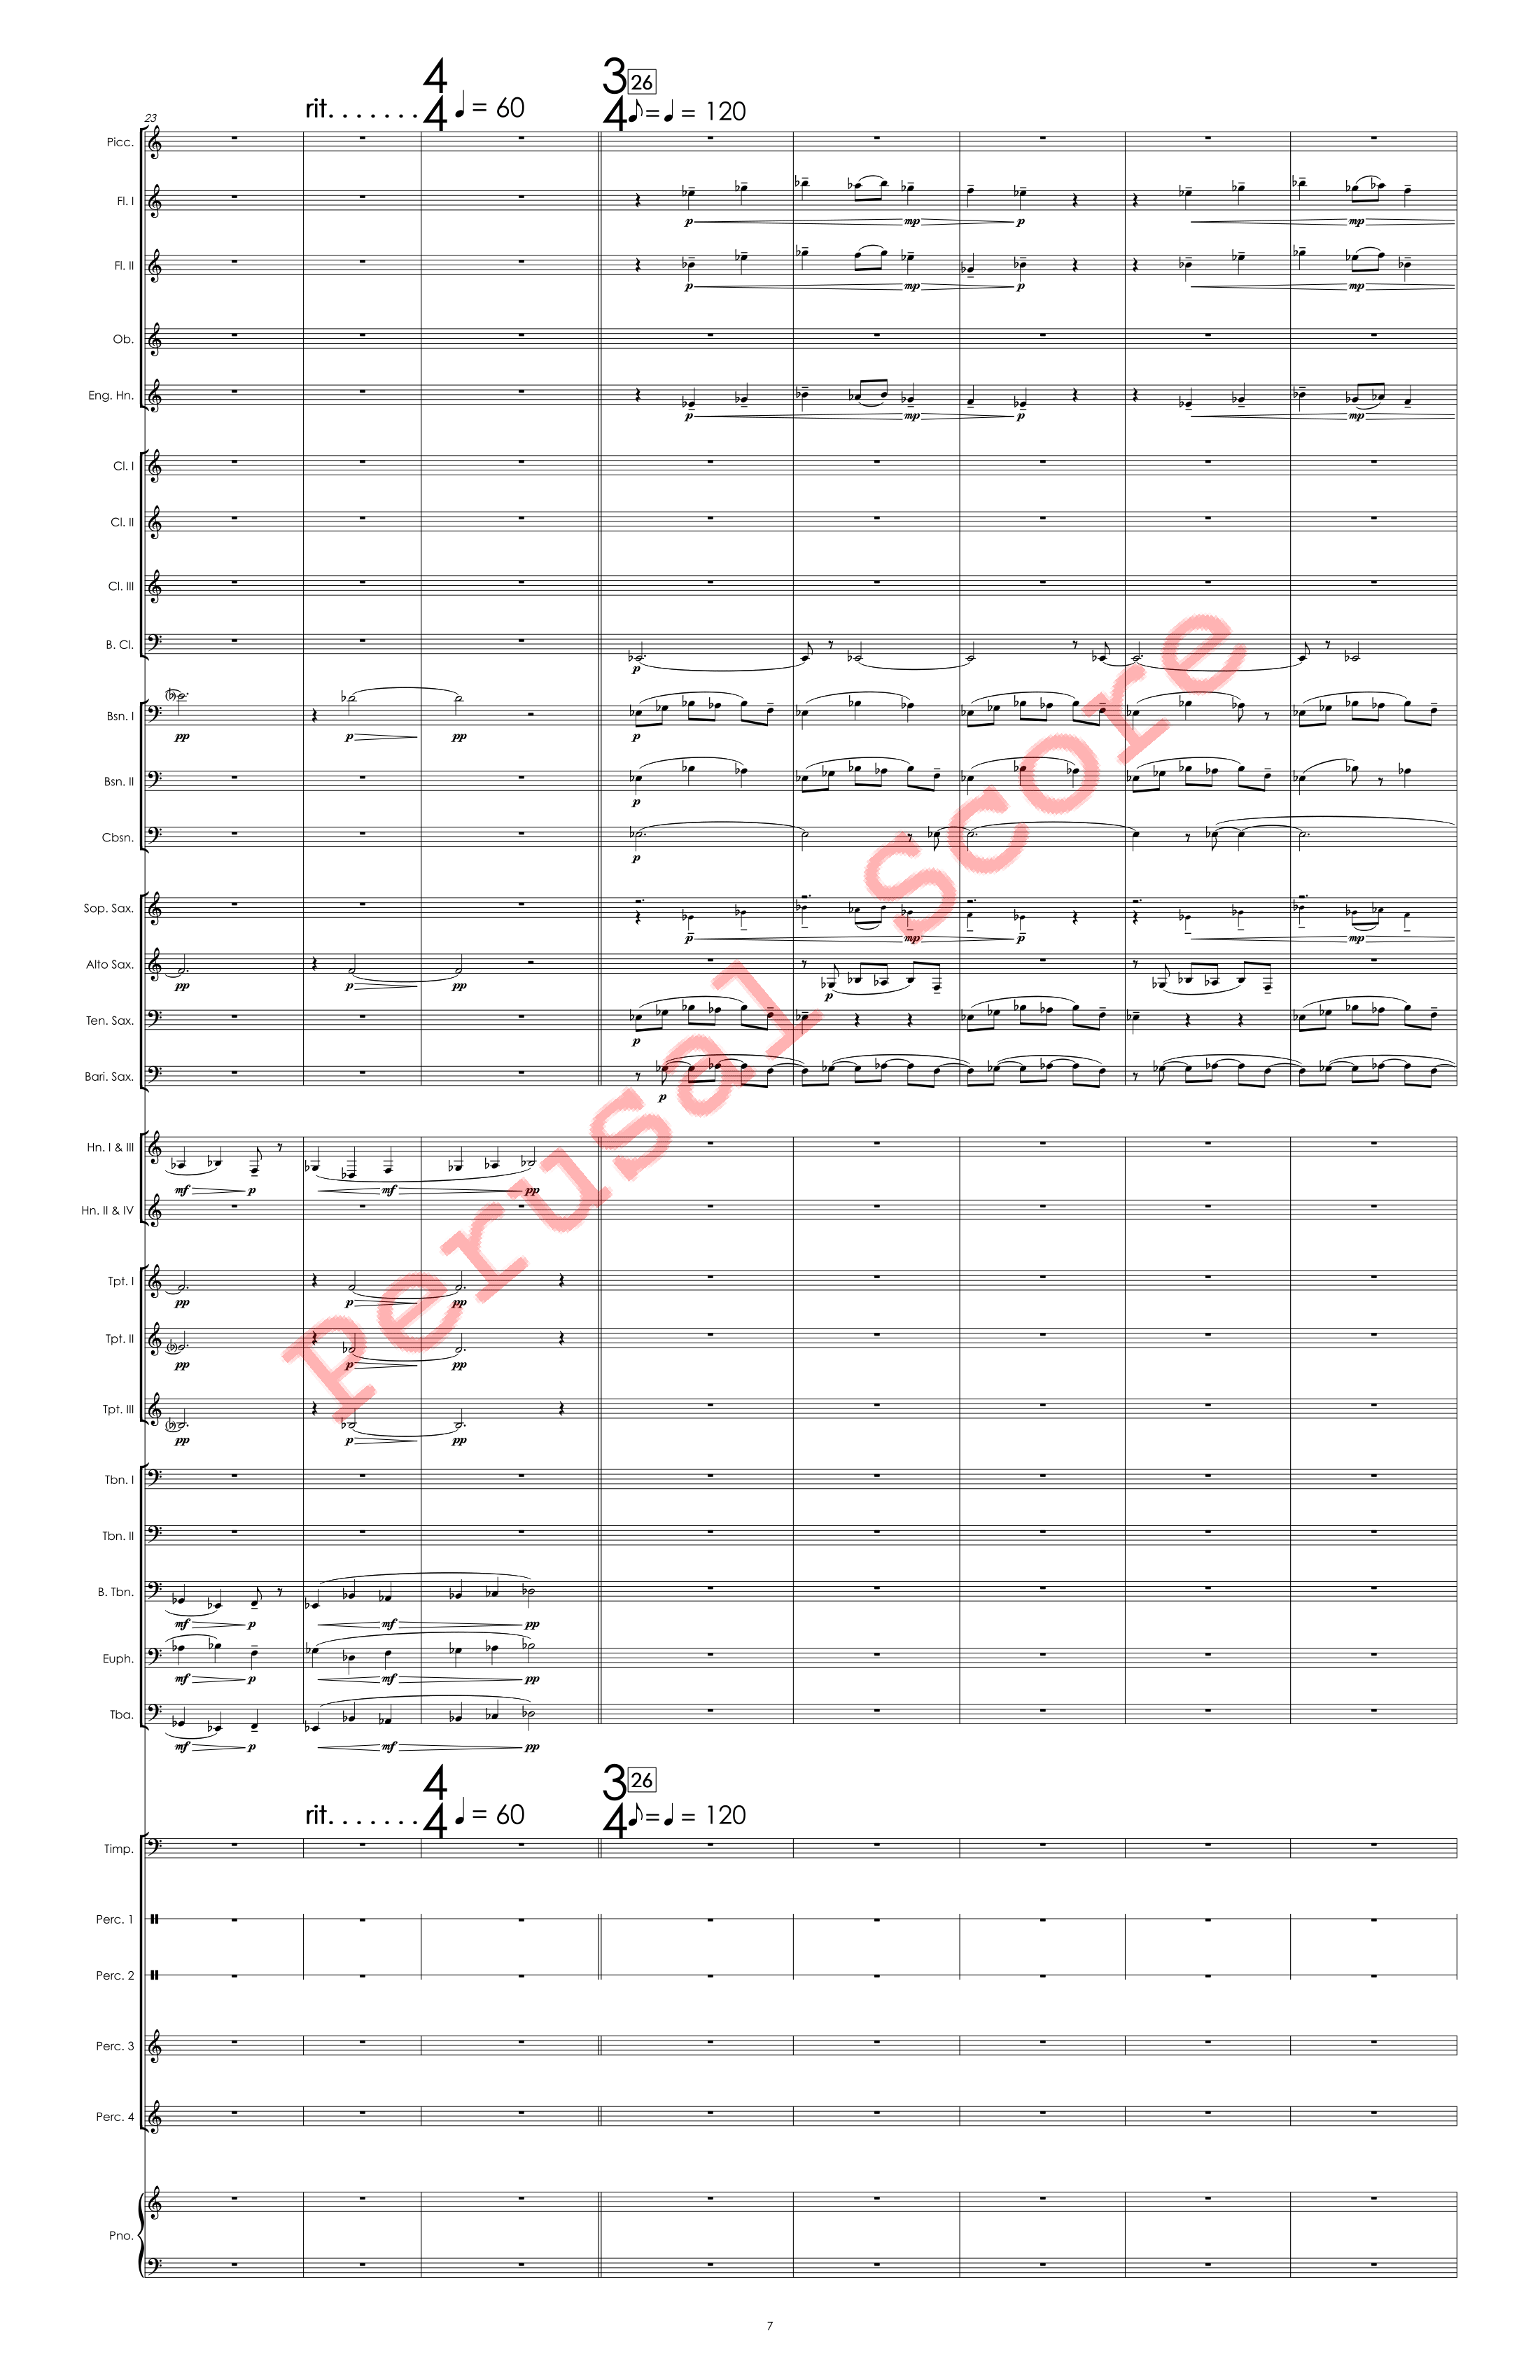 Canadian Folk Song - FINISHED 4.18.23- Full Score perusal score-07.png